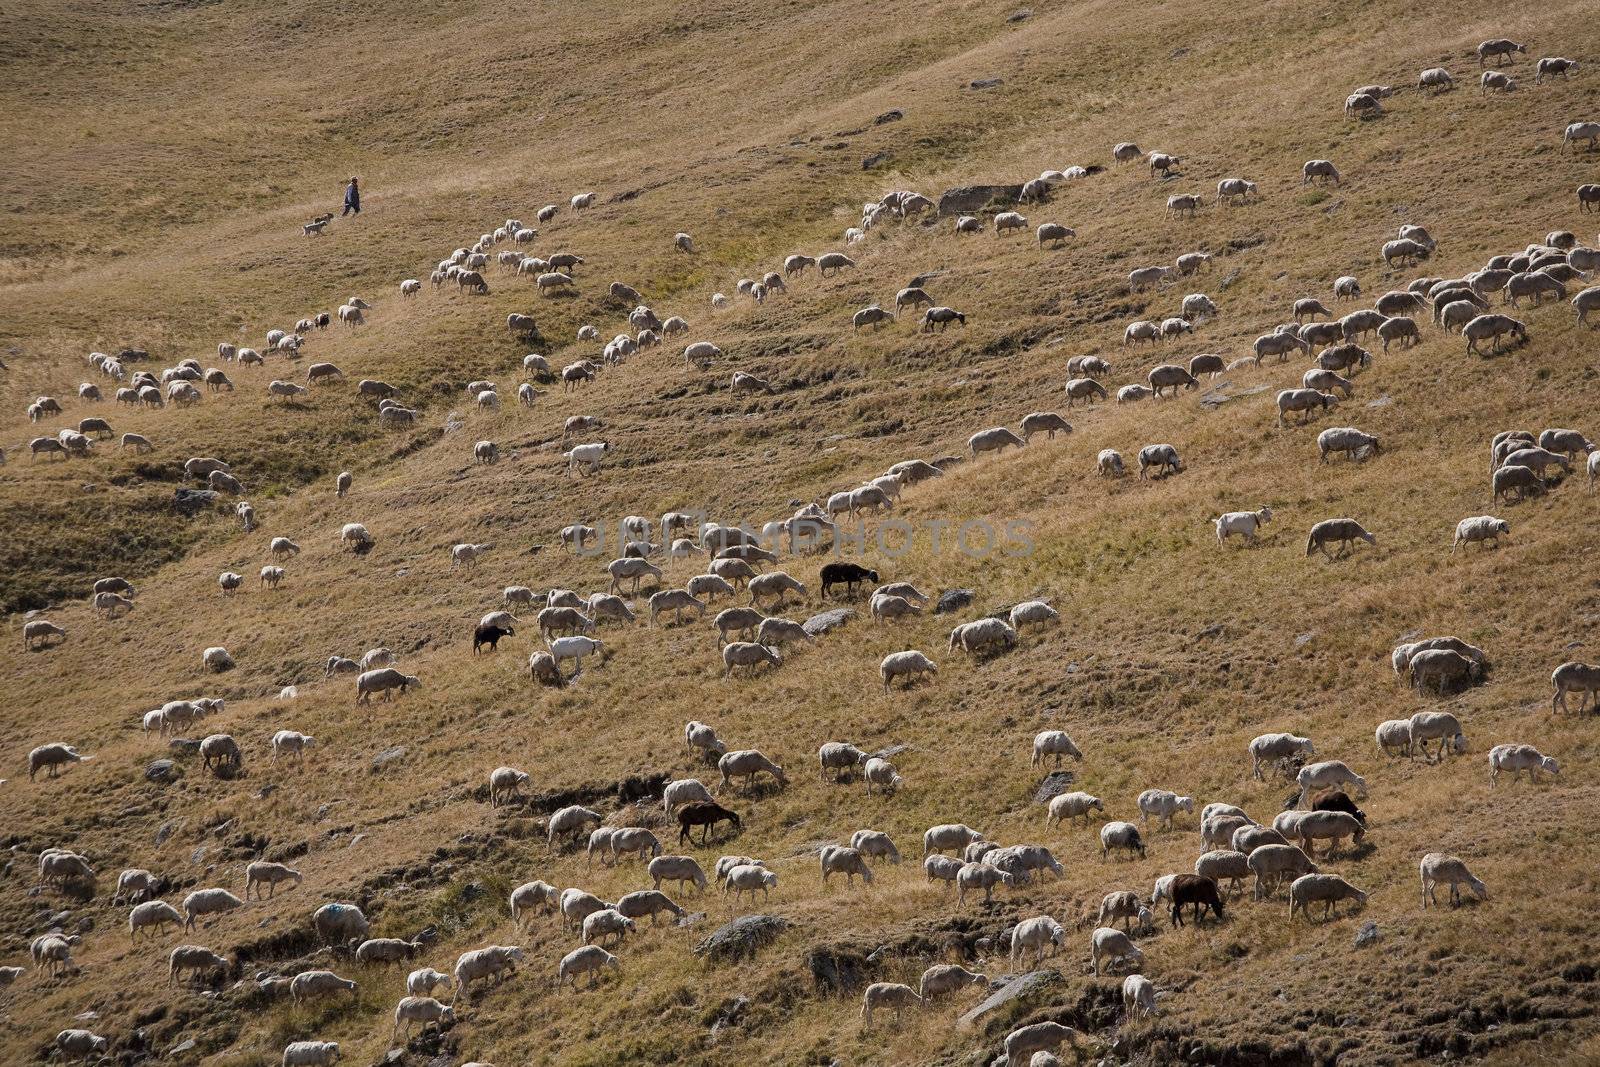 Flock of sheep in Spain by ABCDK